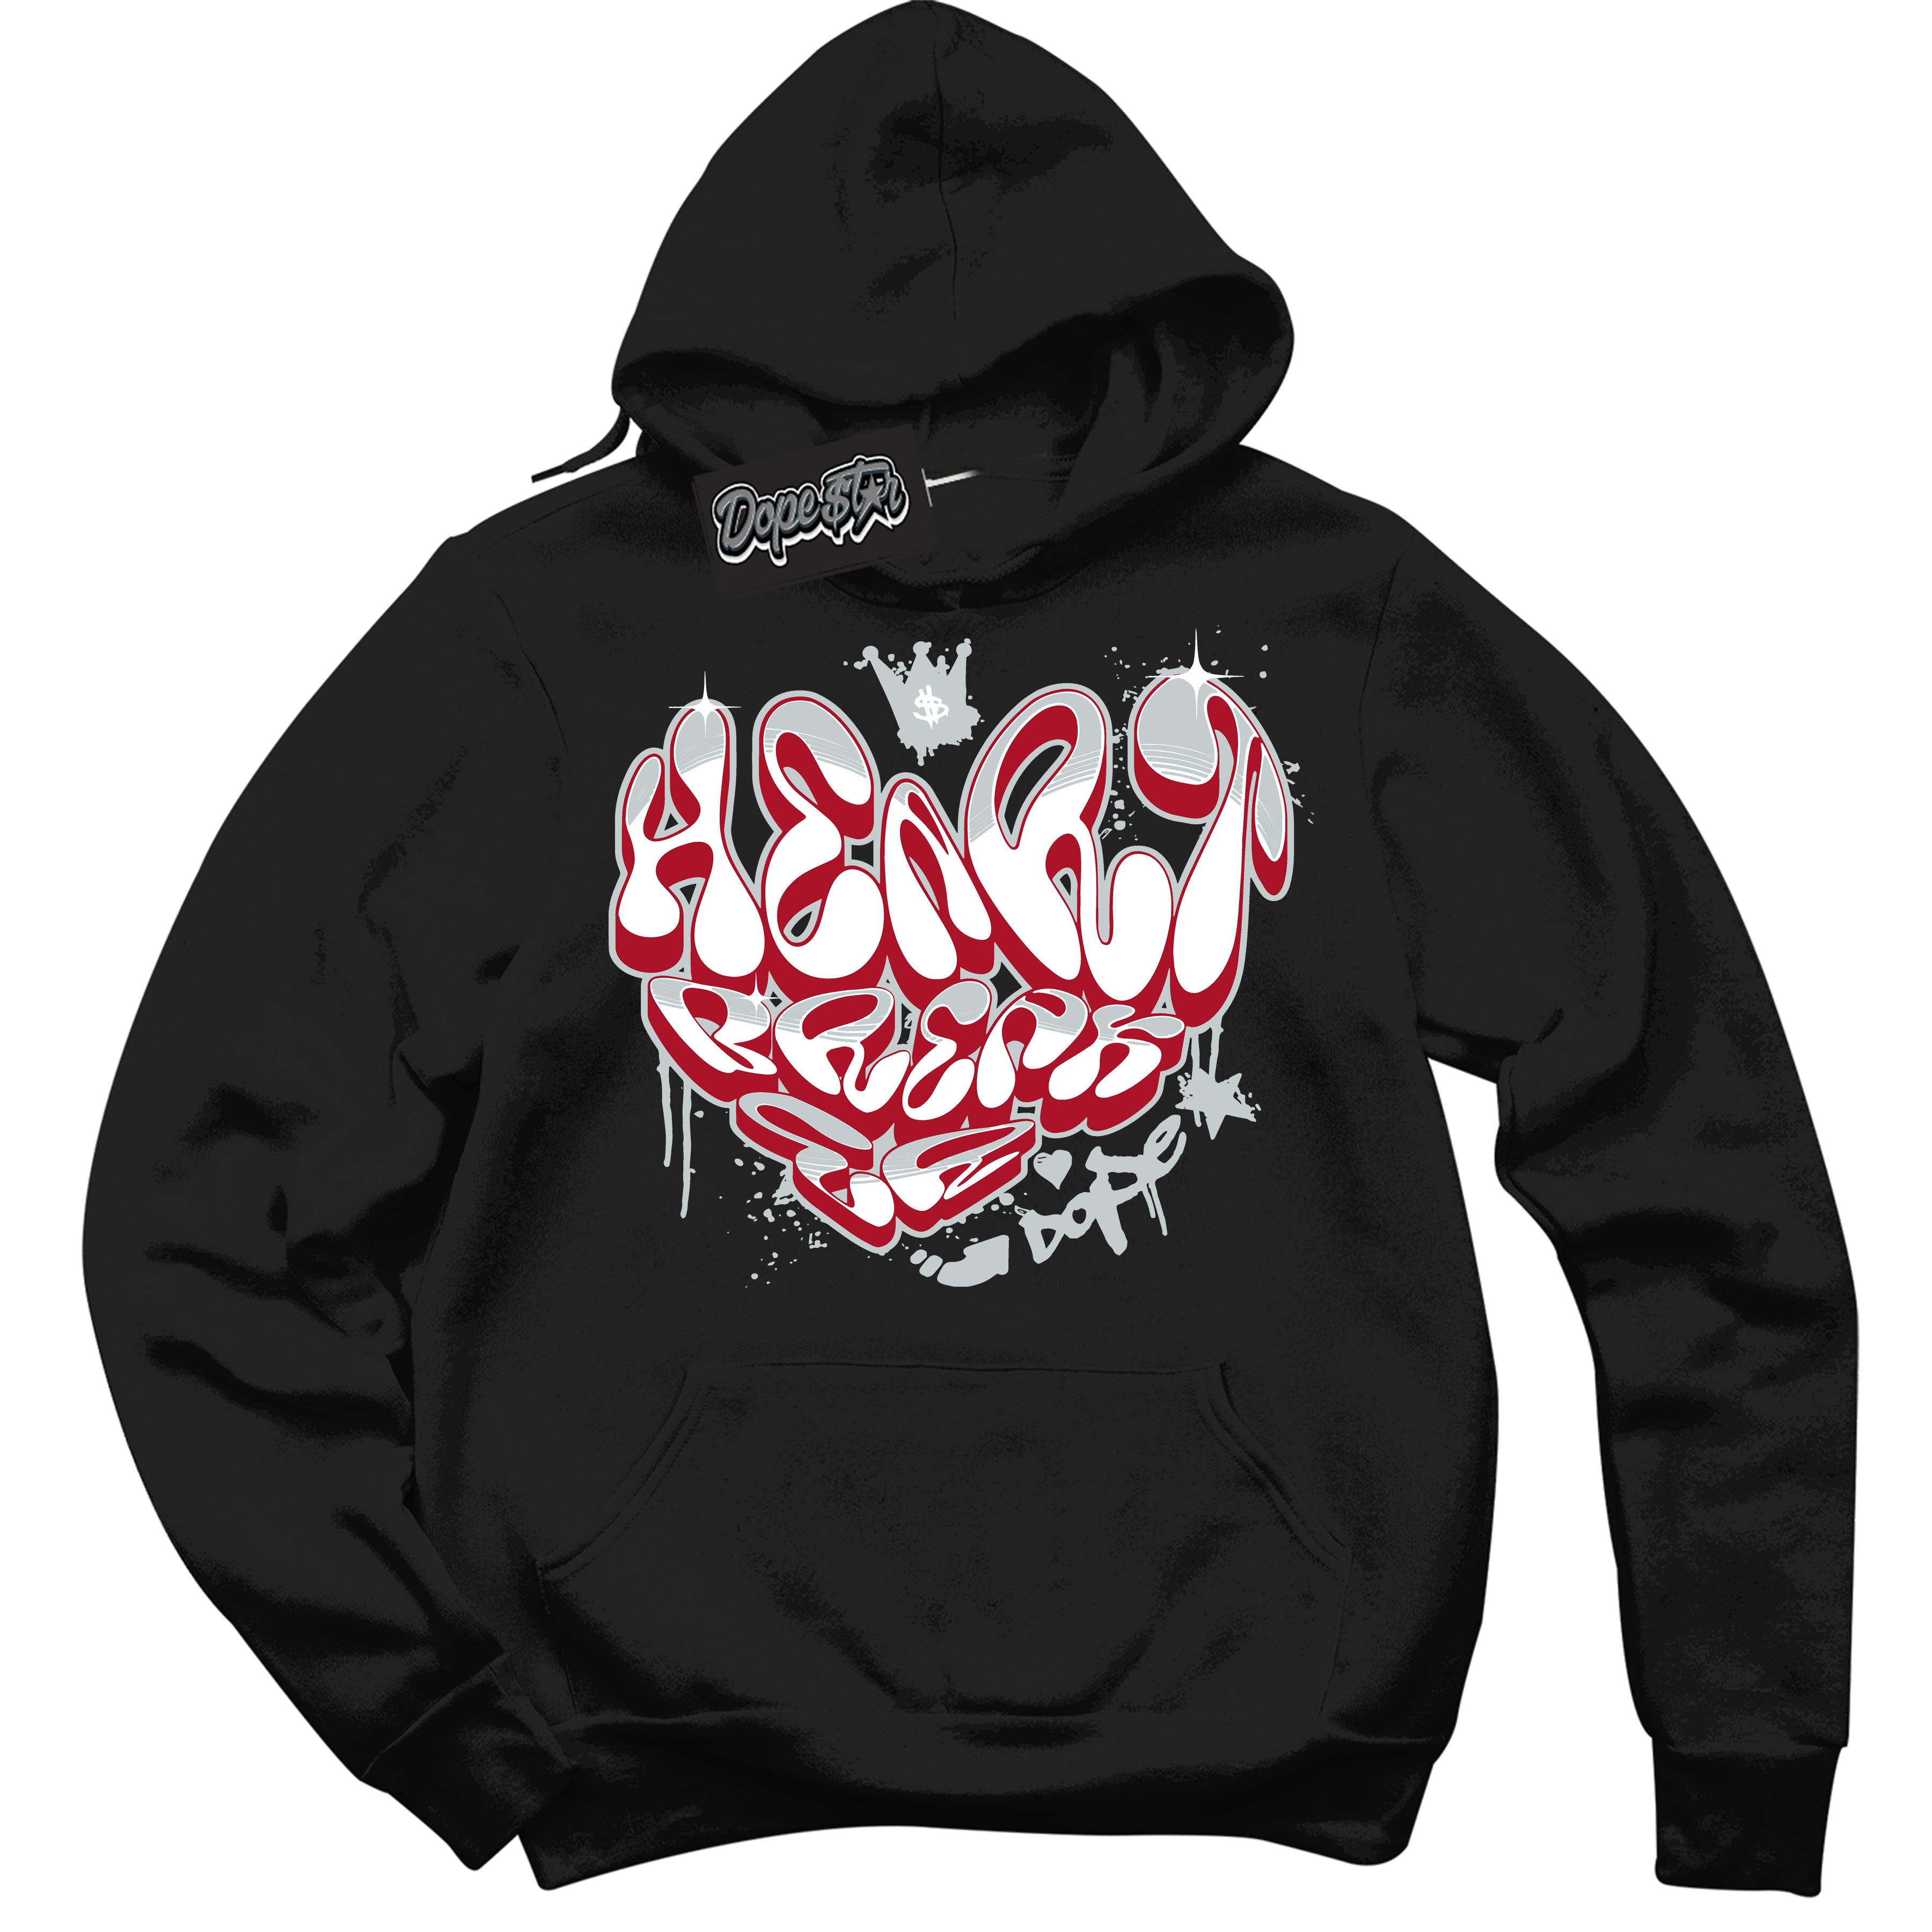 Cool Black Hoodie with “ Heartbreaker Graffiti ”  design that Perfectly Matches  Reverse Ultraman Sneakers.